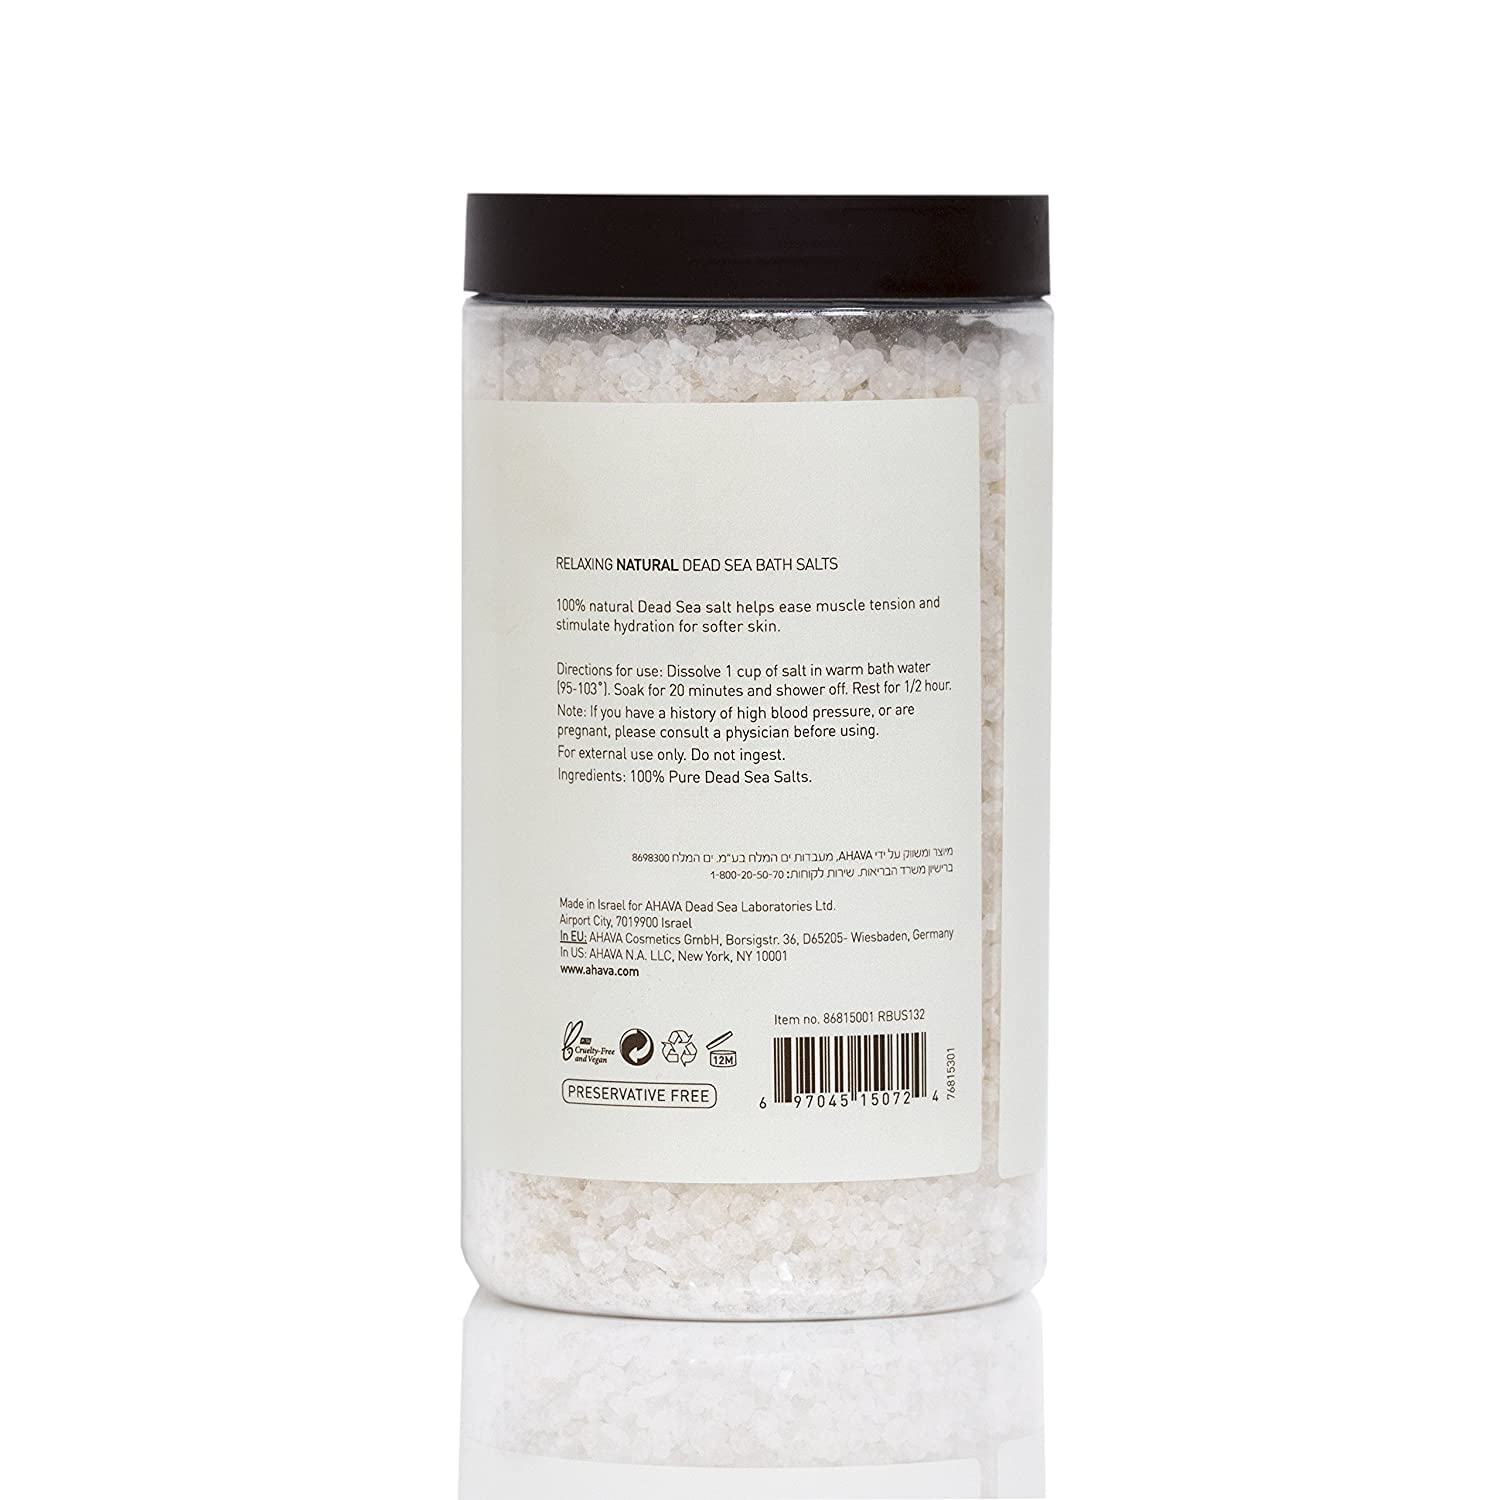 AHAVA Dead Sea Mineral Bath Salt, Soothing Eucalyptus - Intense Relaxation for Body & Mind, Elevates Moisture, Softens & Eases Sore Muscles, Enriched by Exclusive Dead Sea Salt & Osmoter blend, 32 Oz